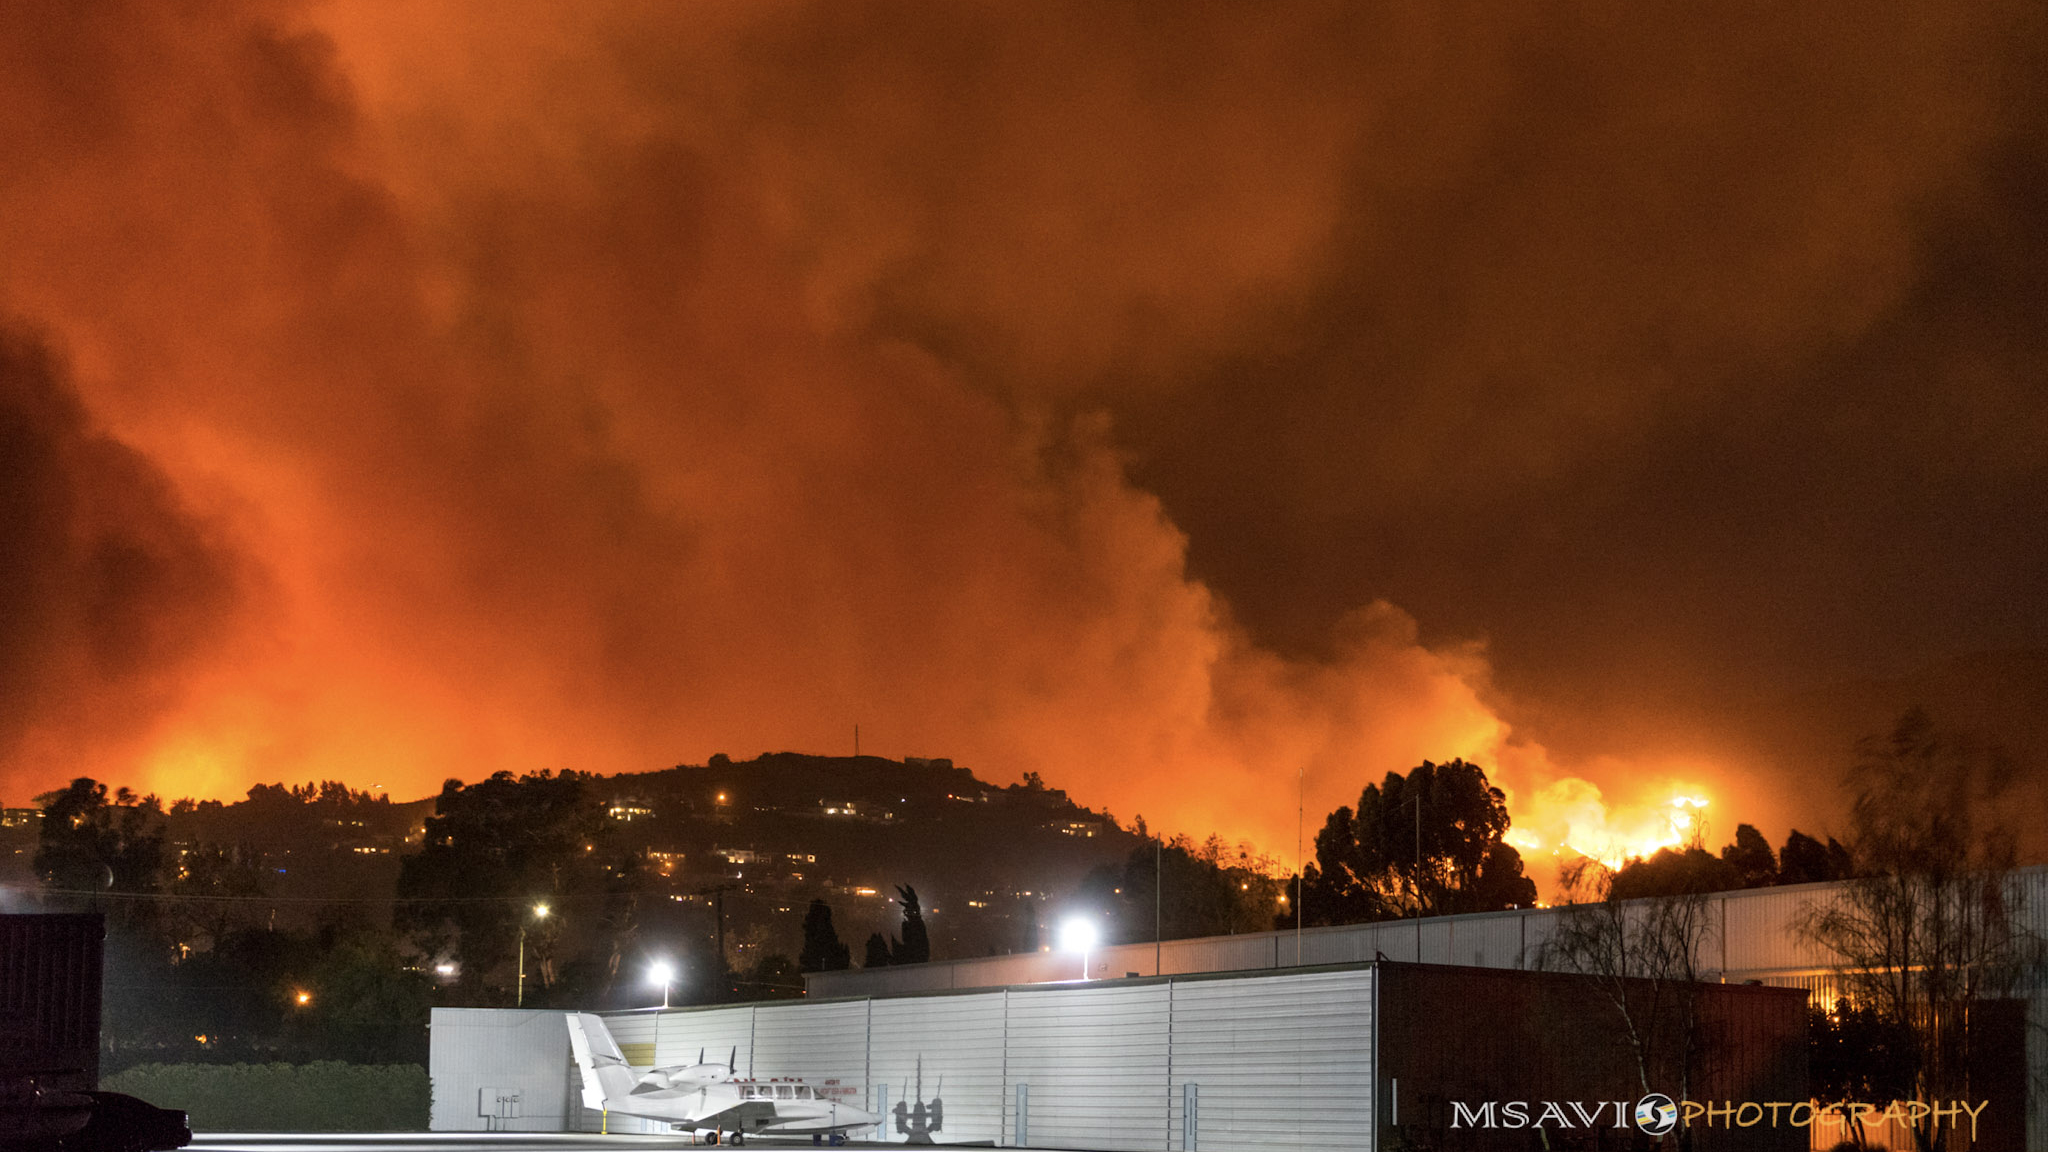 Flames and smoke rise near California's Santa Paula Airport, a base of operations for firefighters battling the nearby Thomas Fire. Photo by Mike Salas, MSAVI Photography and Focal Flight.